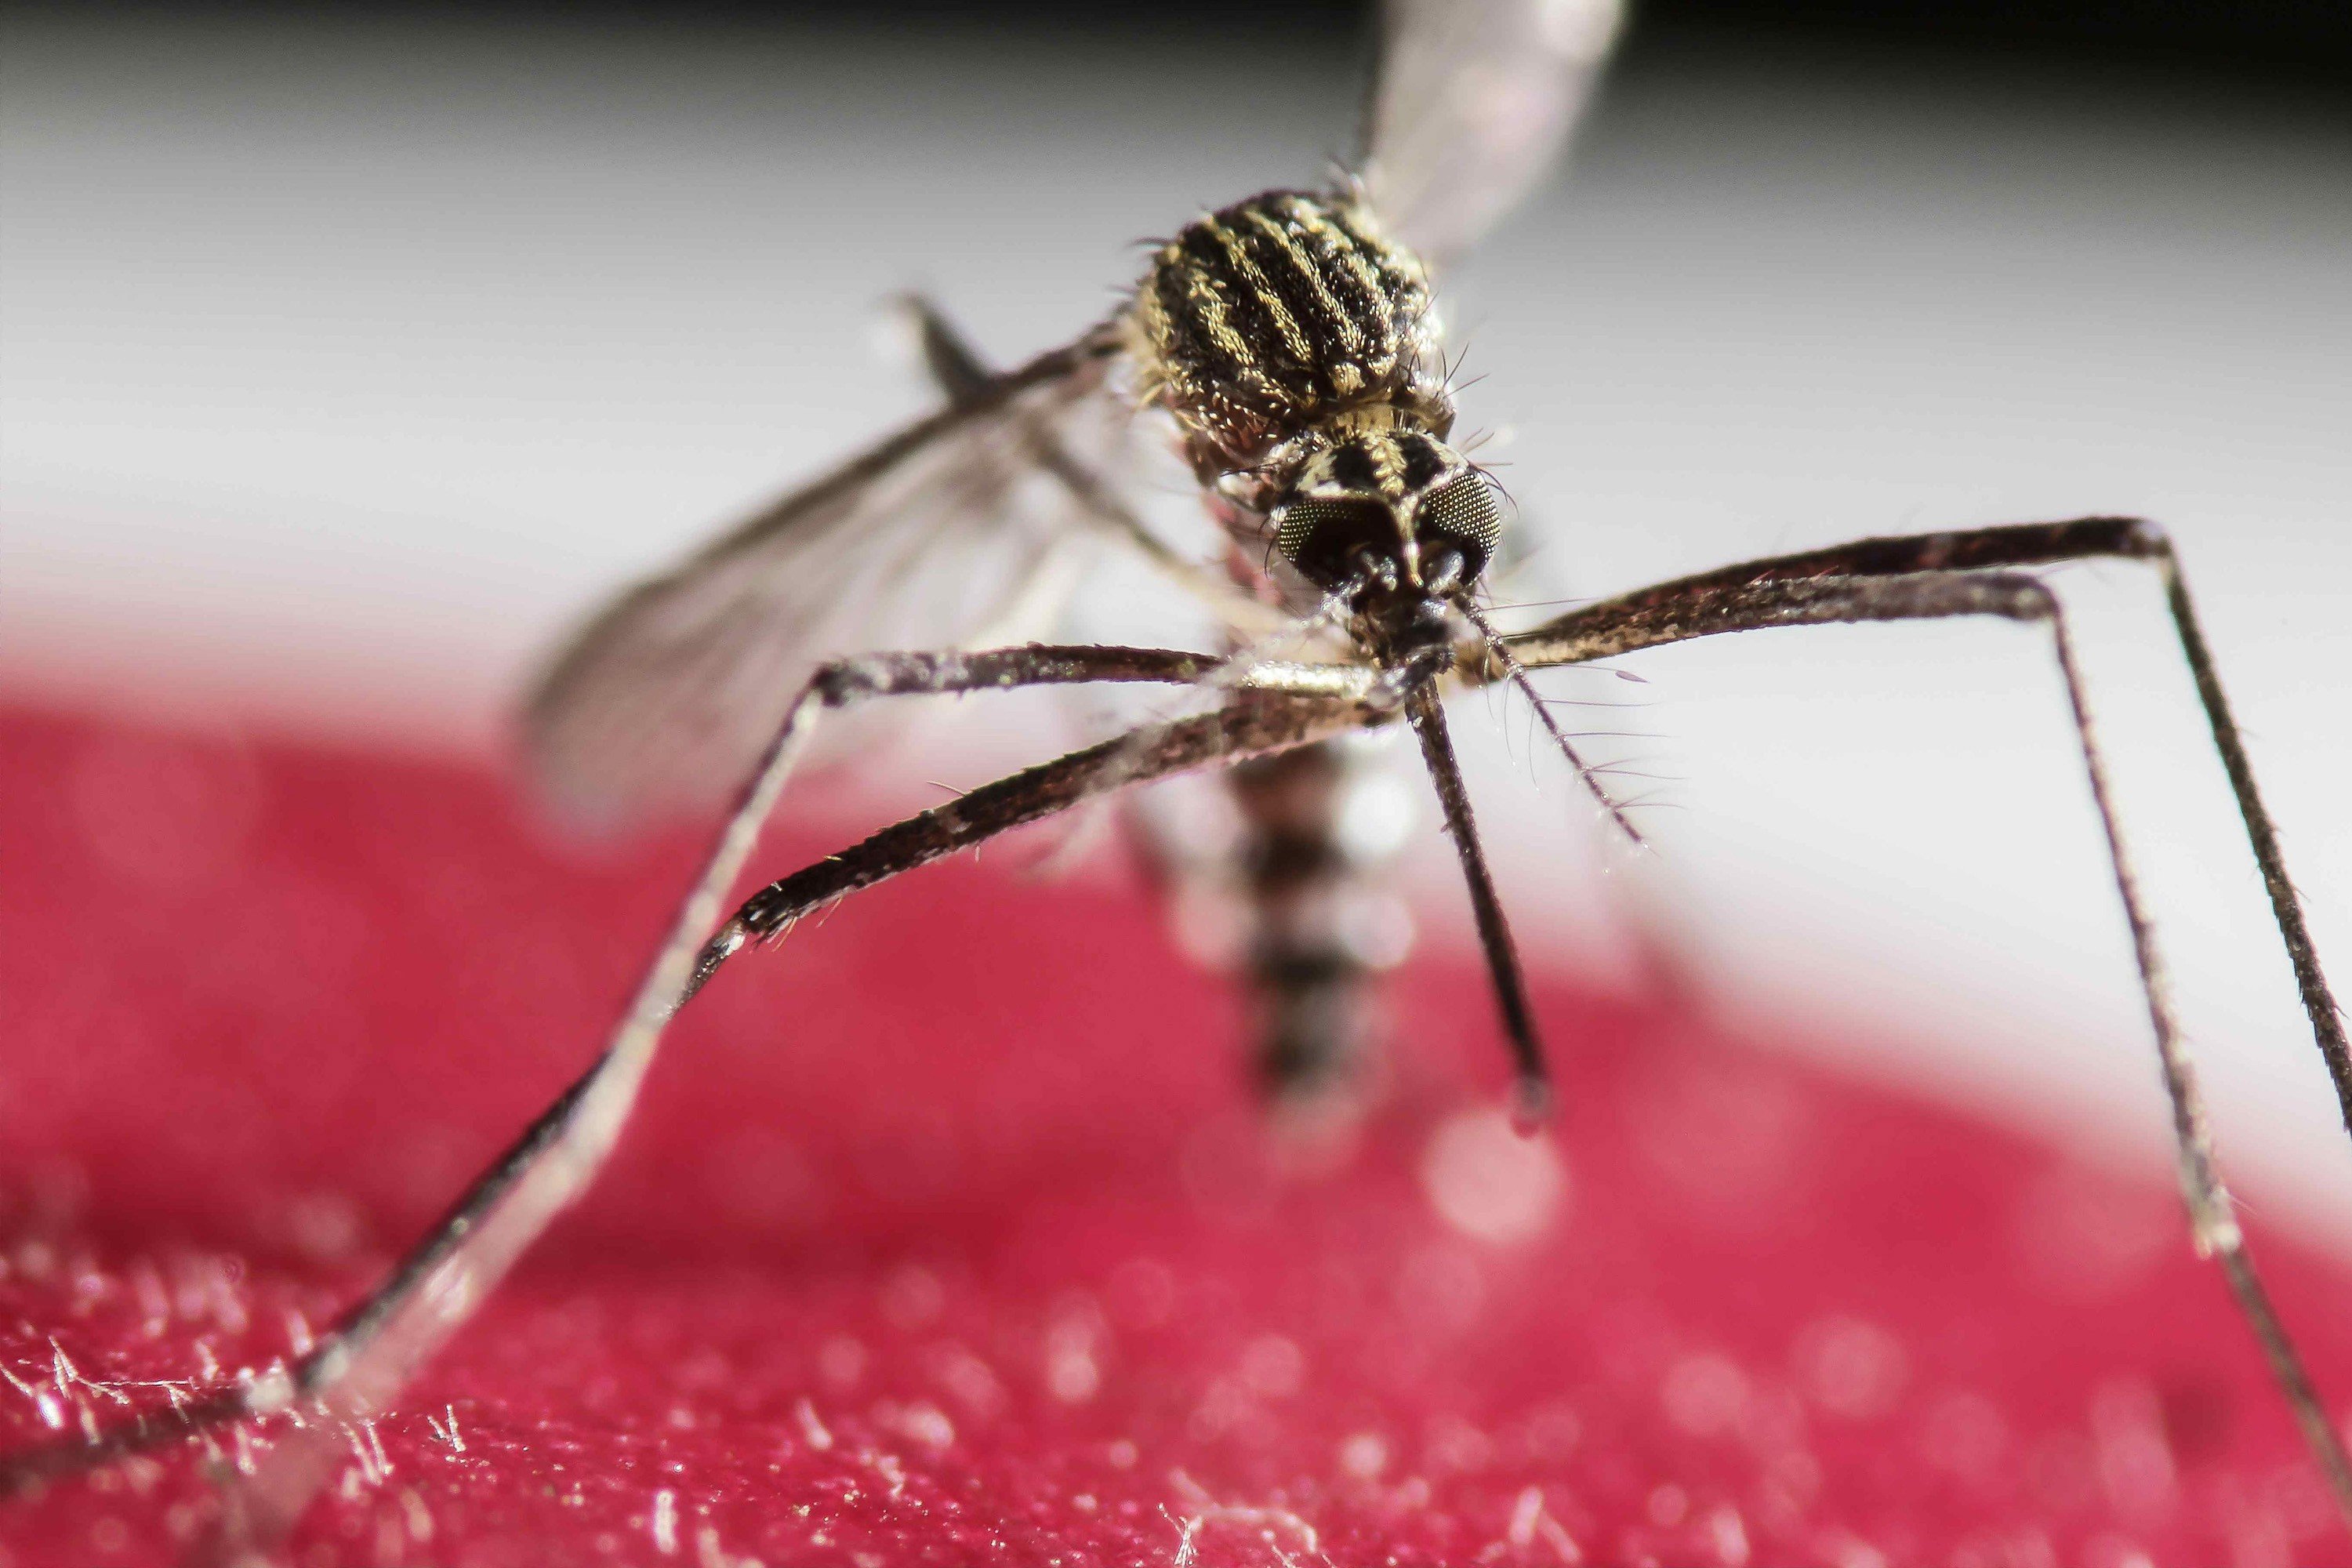 The mosquito-borne Zika virus swept across Latin America, the Caribbean and southern United States in 2015 and 2016, sparking a global health emergency. Photo: TNS